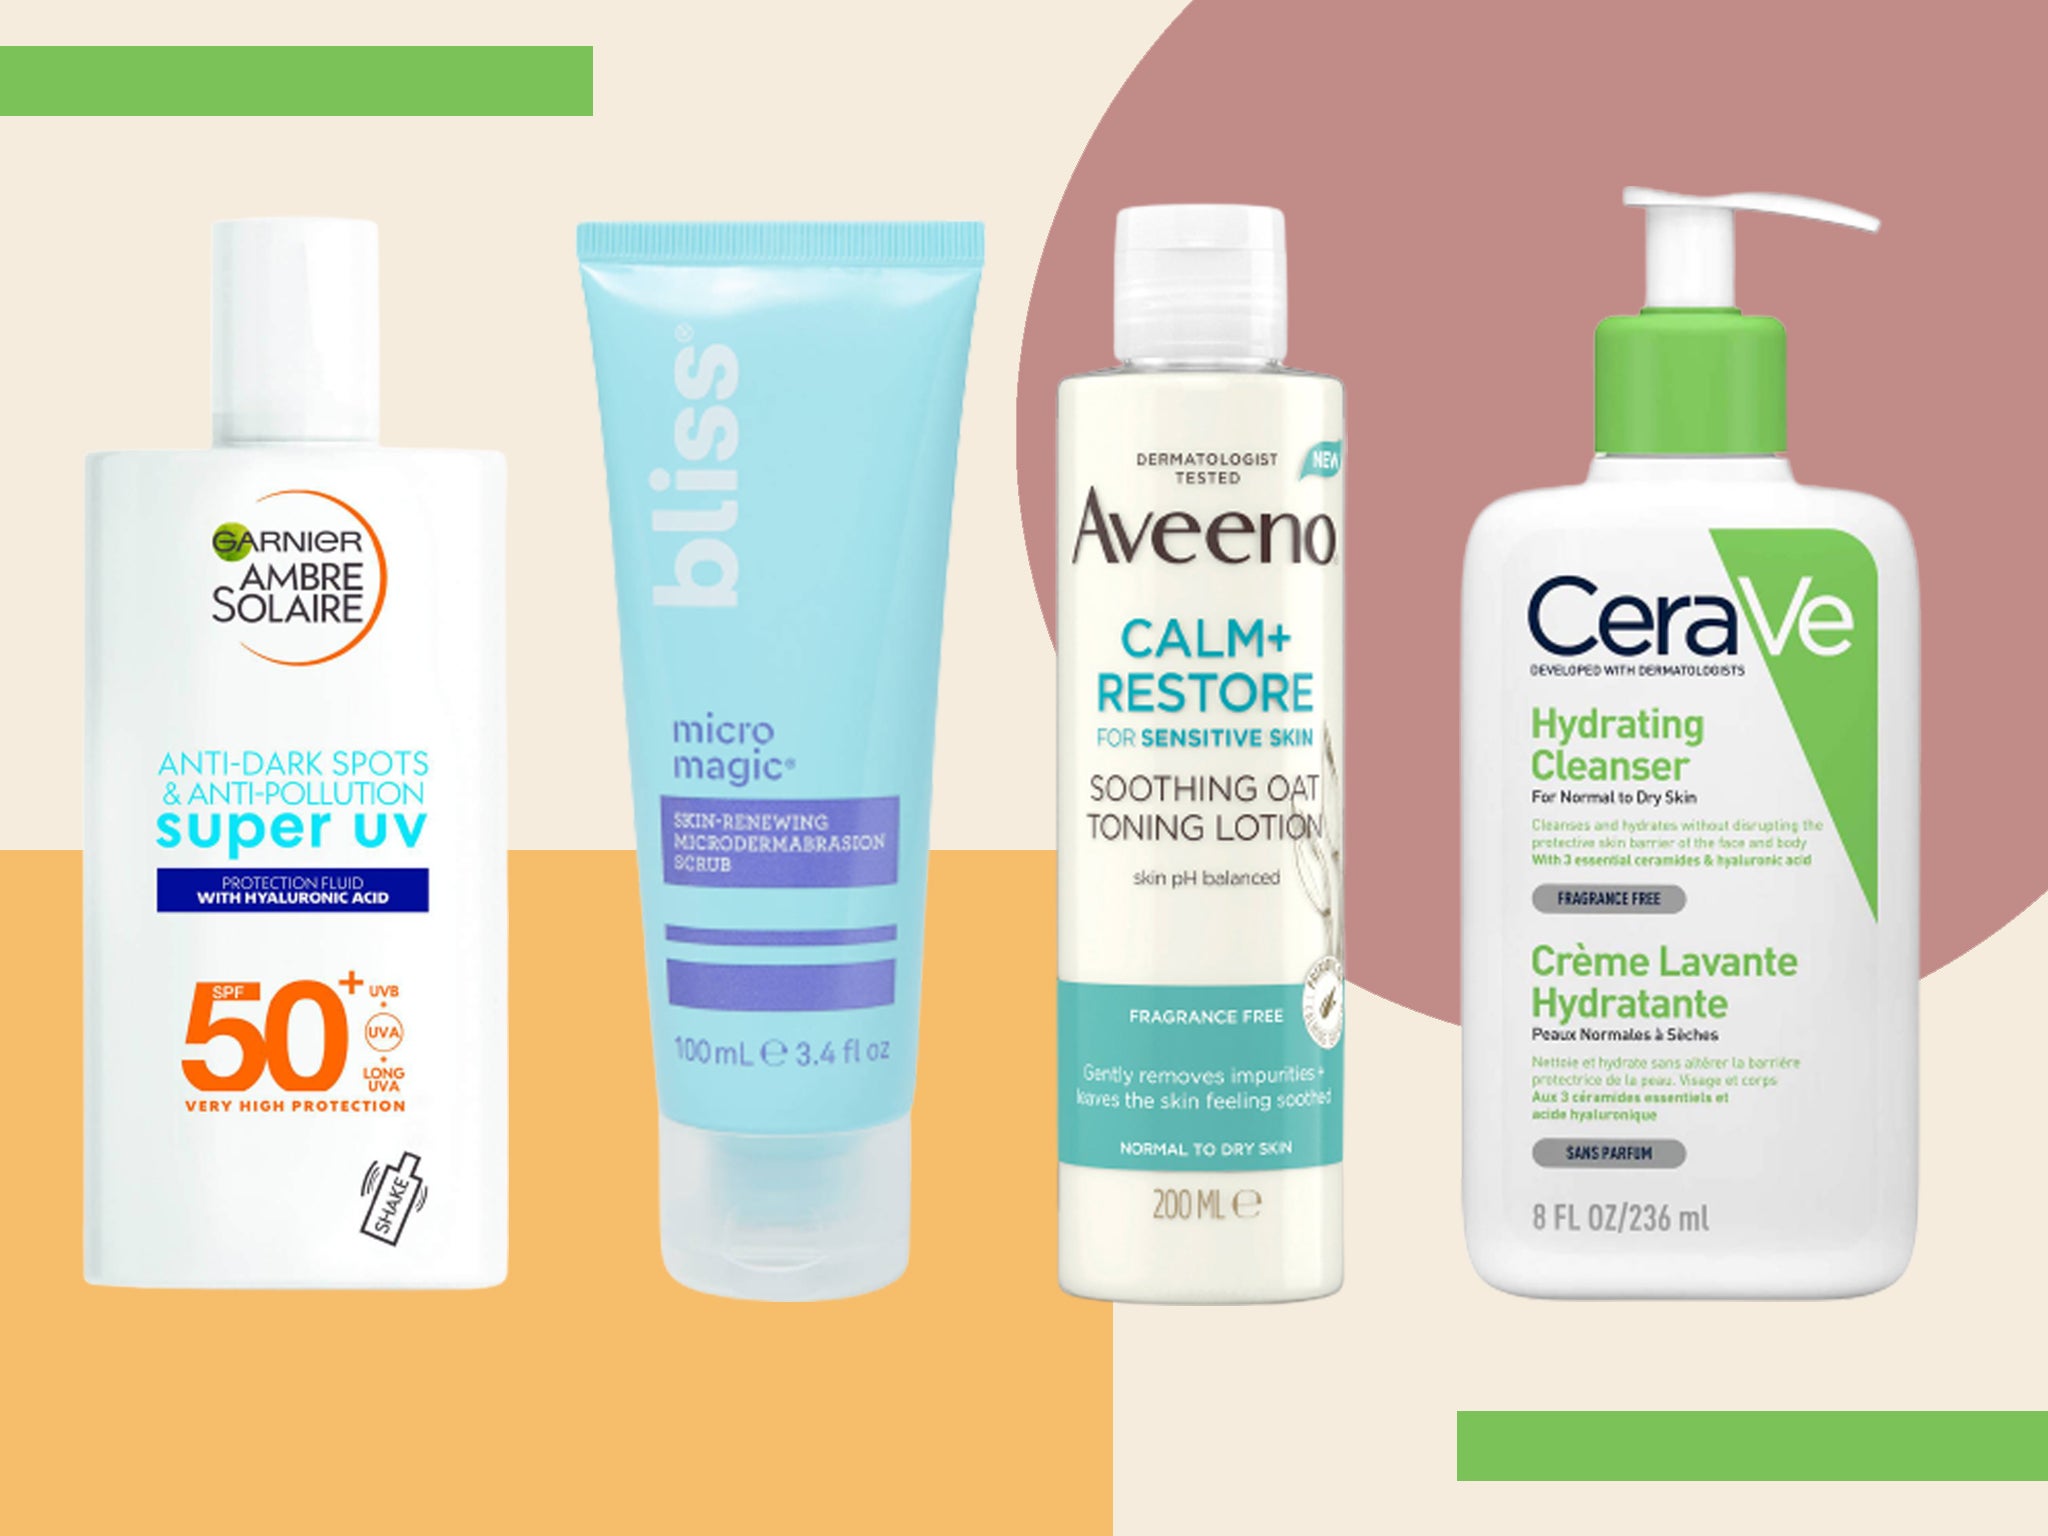 We tried these affordable options on our tester’s slightly oily, acne-prone and sometimes sensitive skin